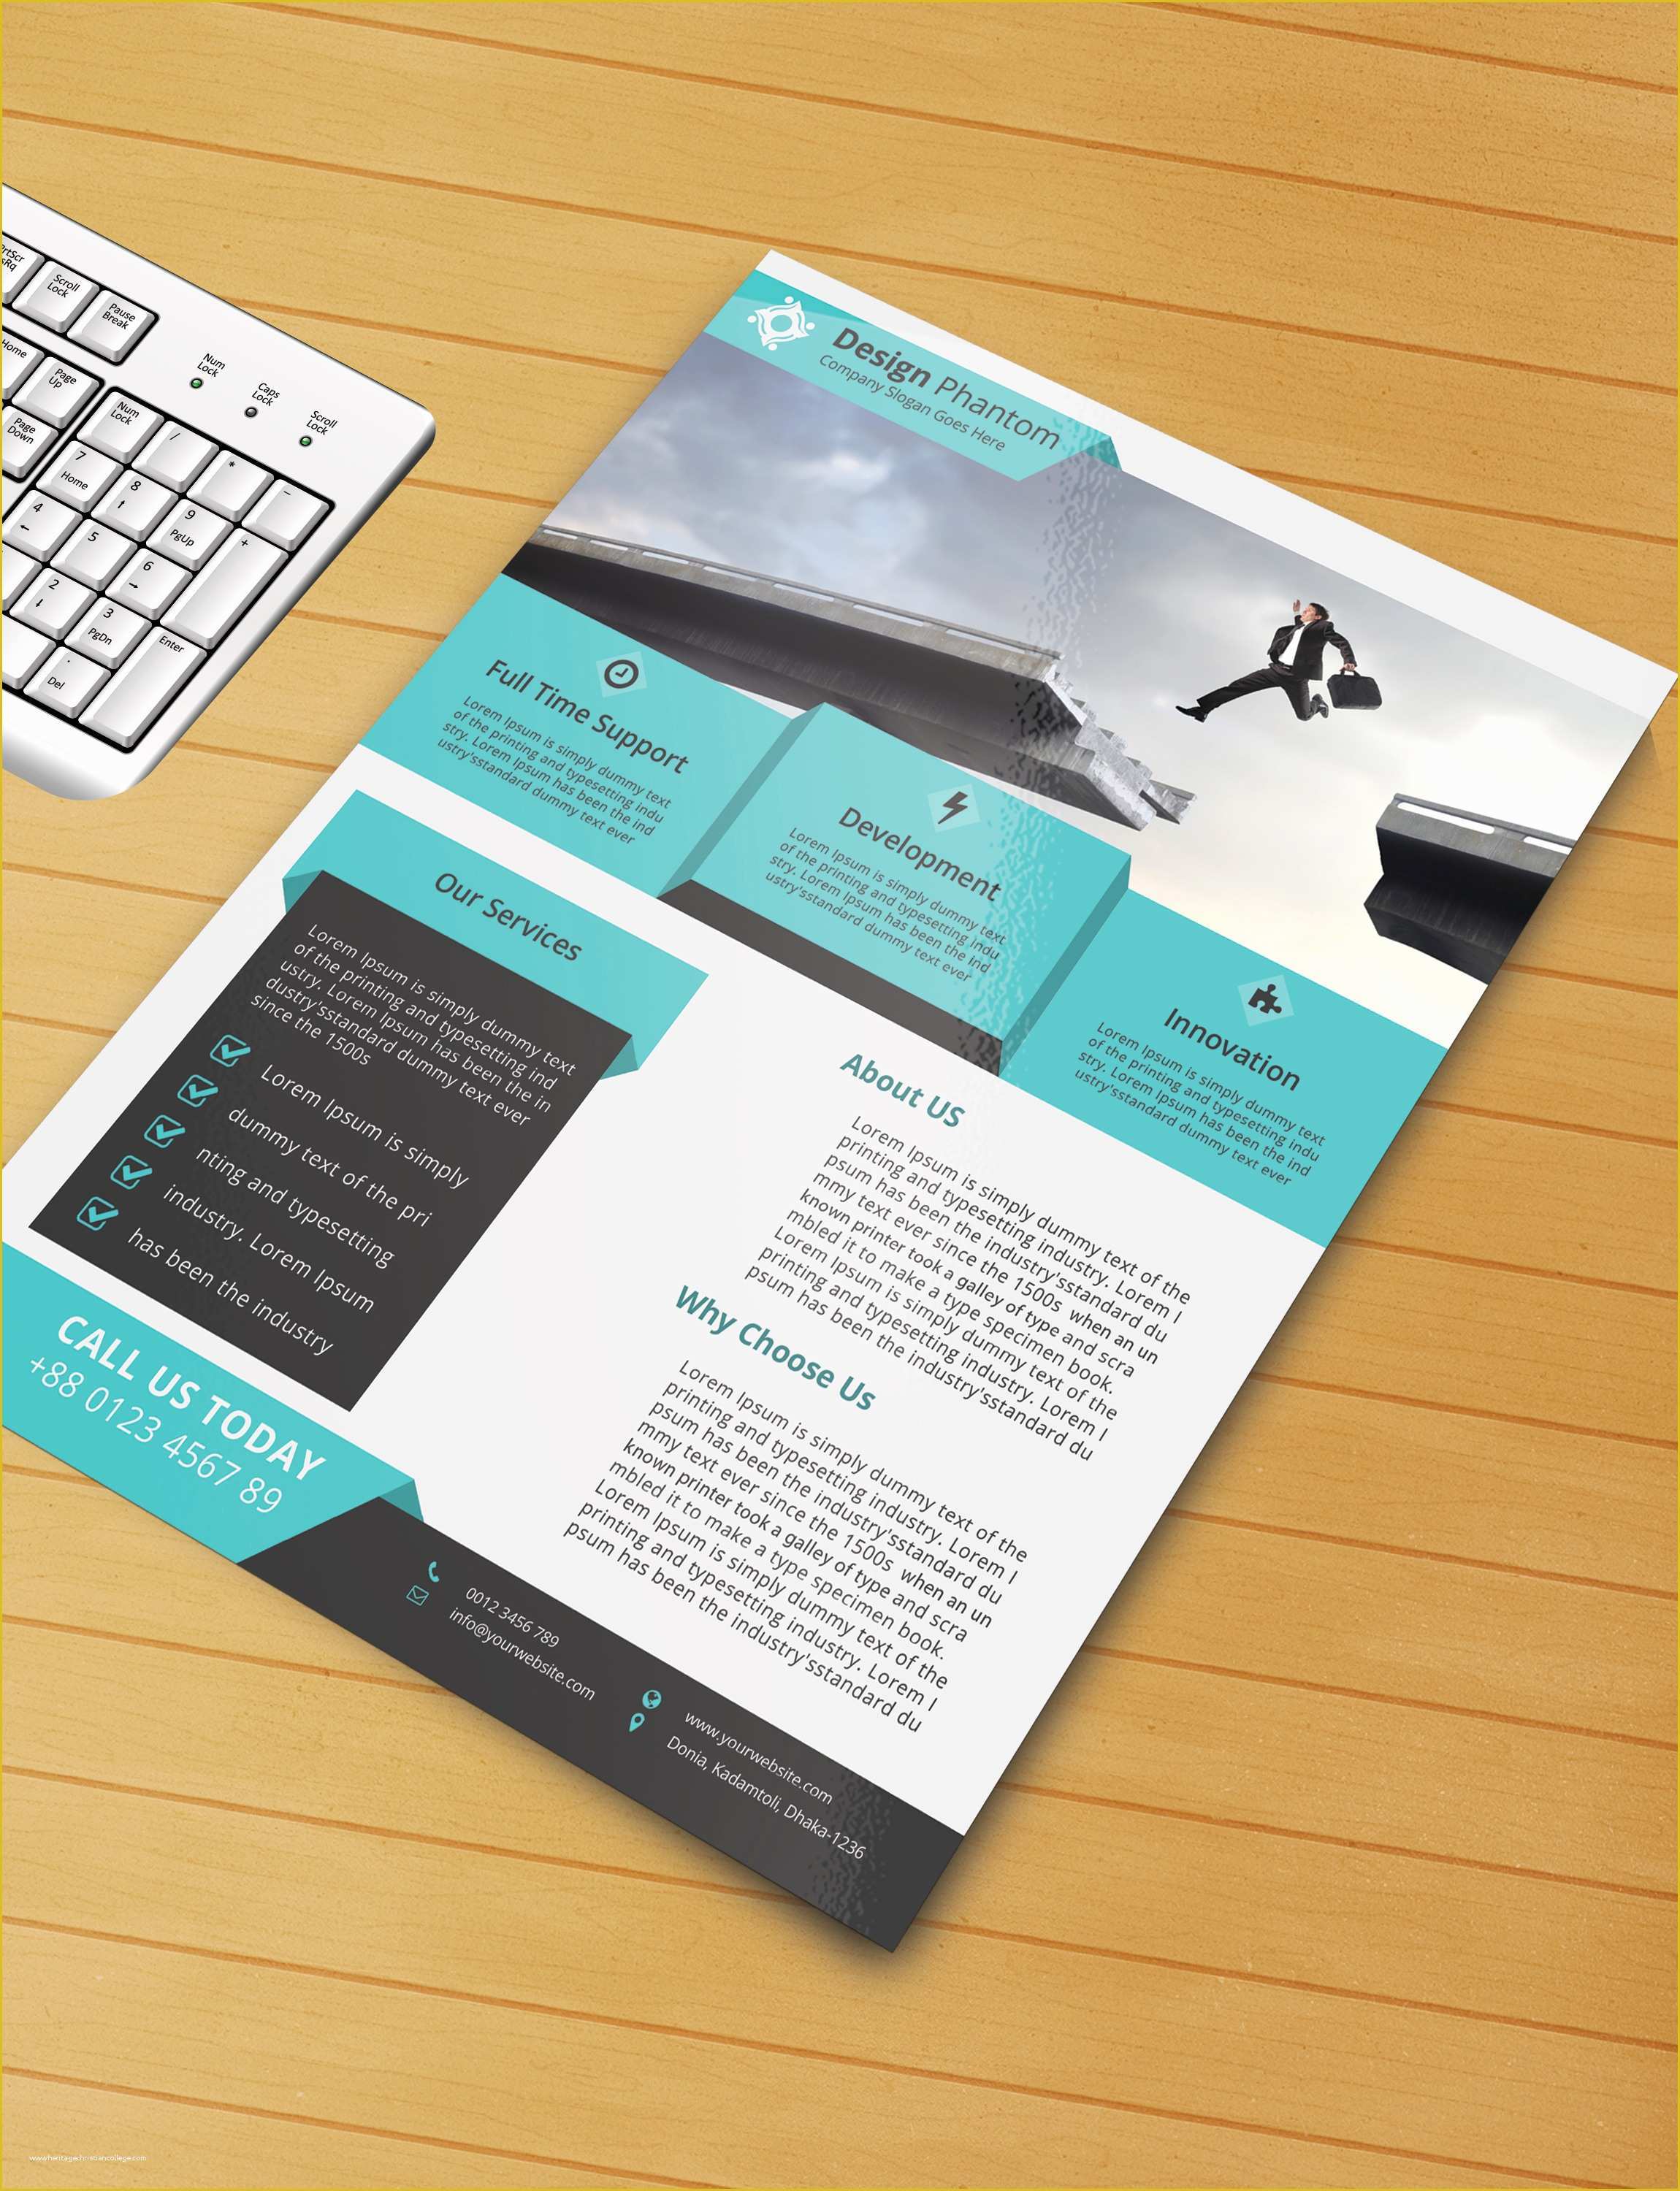 A5 Size Brochure Templates Psd Free Download Of Free Flyer Psd Template Free Download by Designphantom